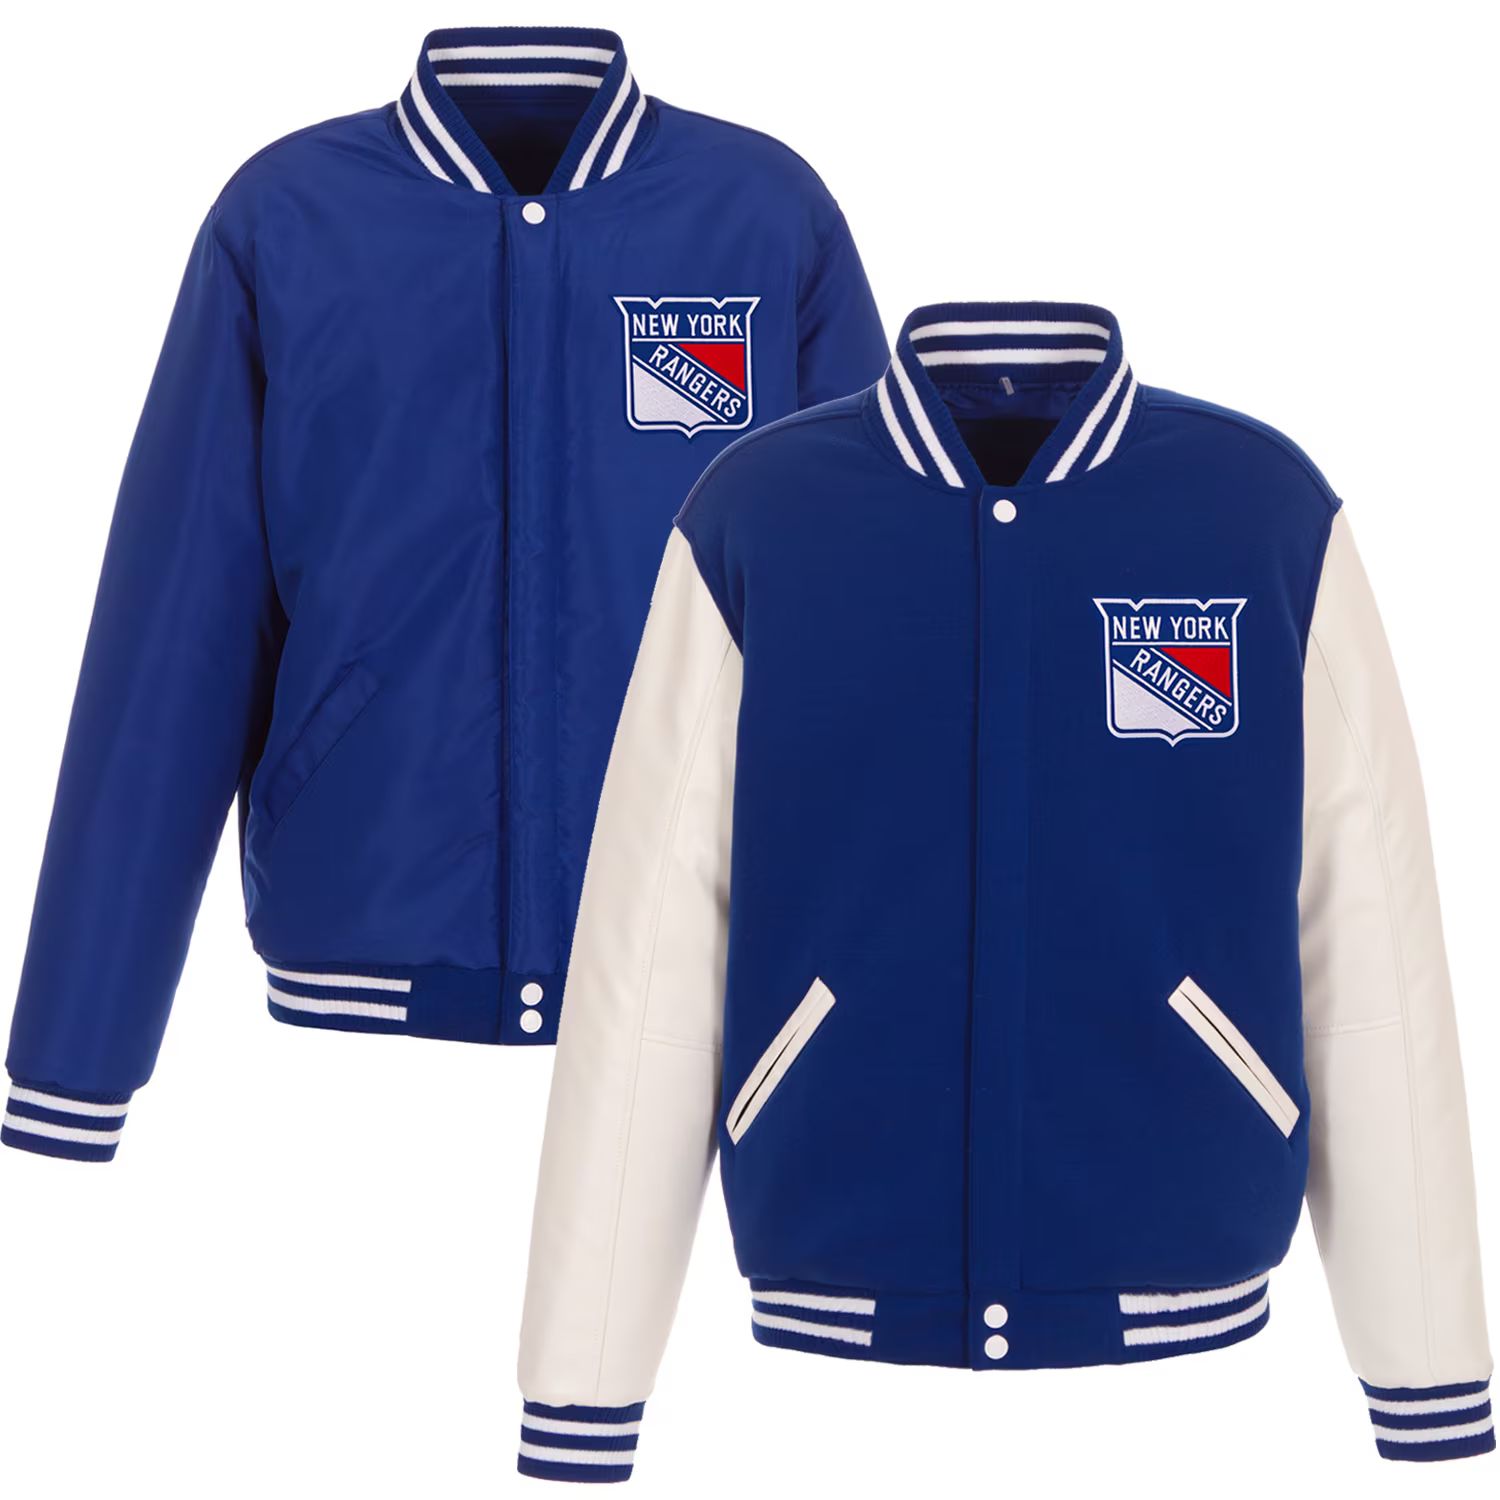 Men's New York Rangers JH Design Royal/White Reversible Fleece Jacket with Faux Leather Sleeves | NHL Shop